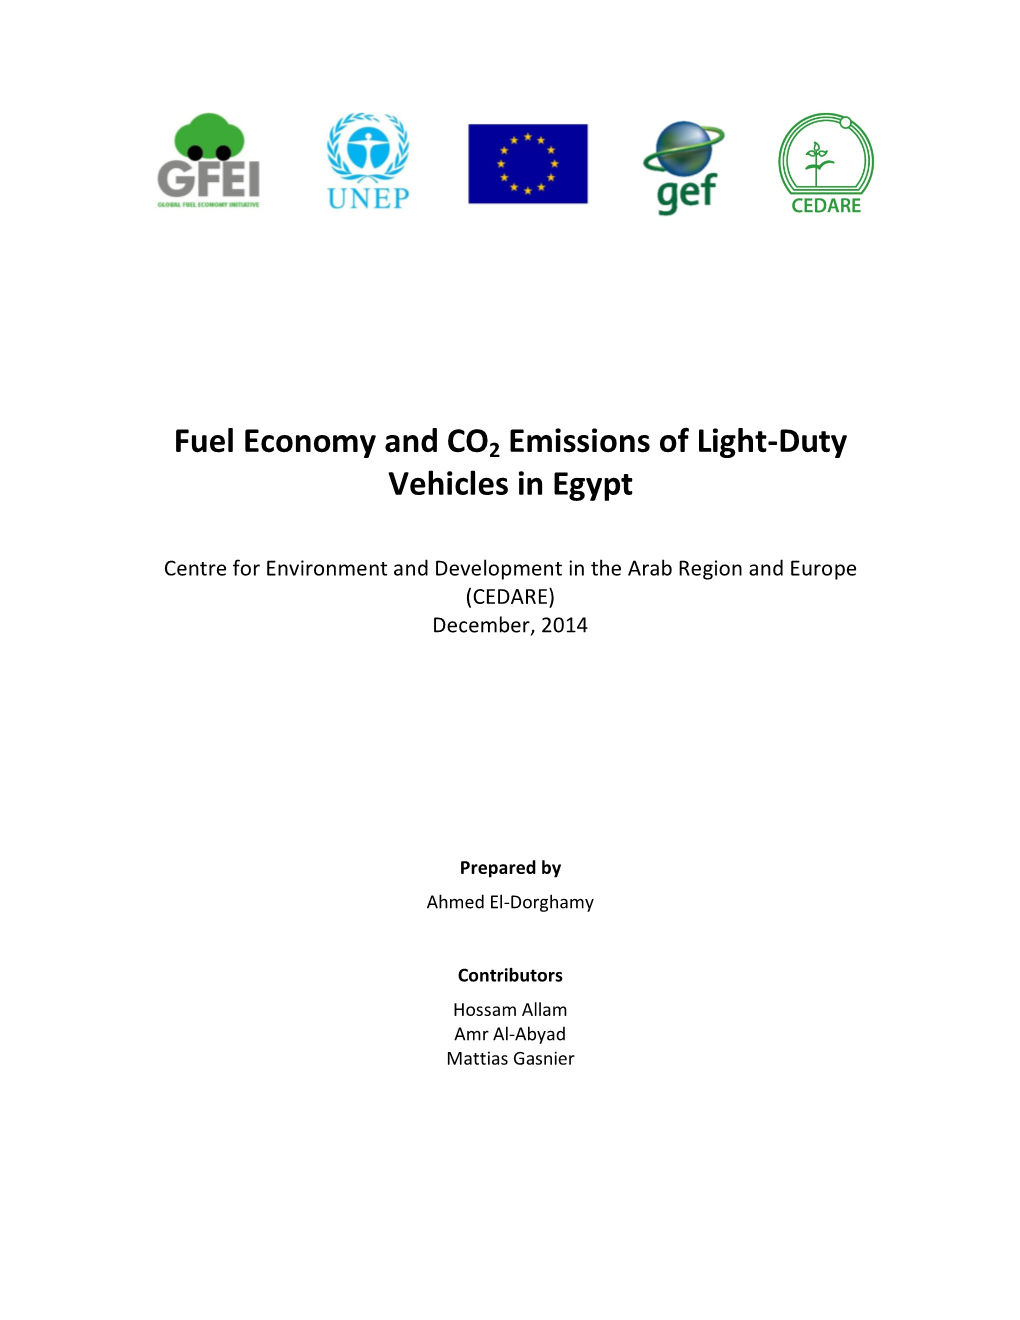 Fuel Economy and CO2 Emissions of Light-Duty Vehicles in Egypt